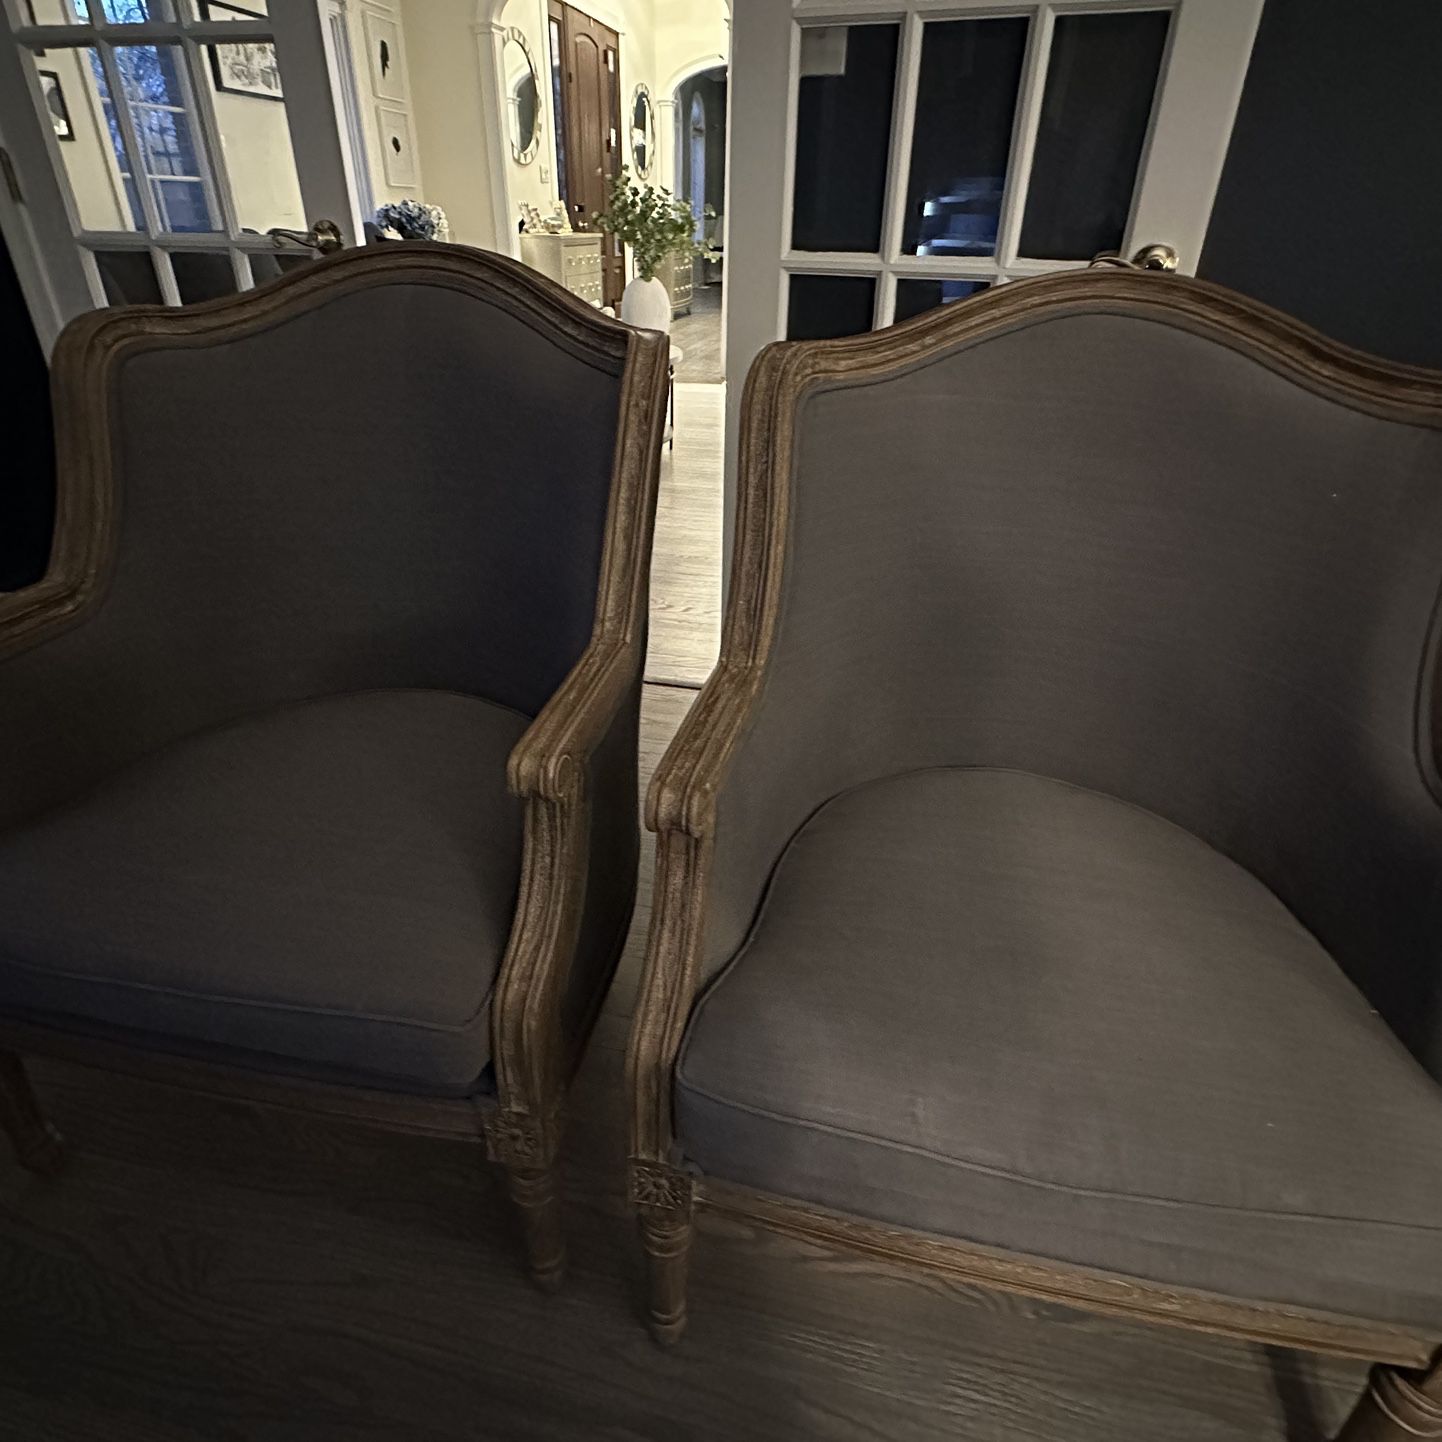 Hakes Upholstered Wingback Chair